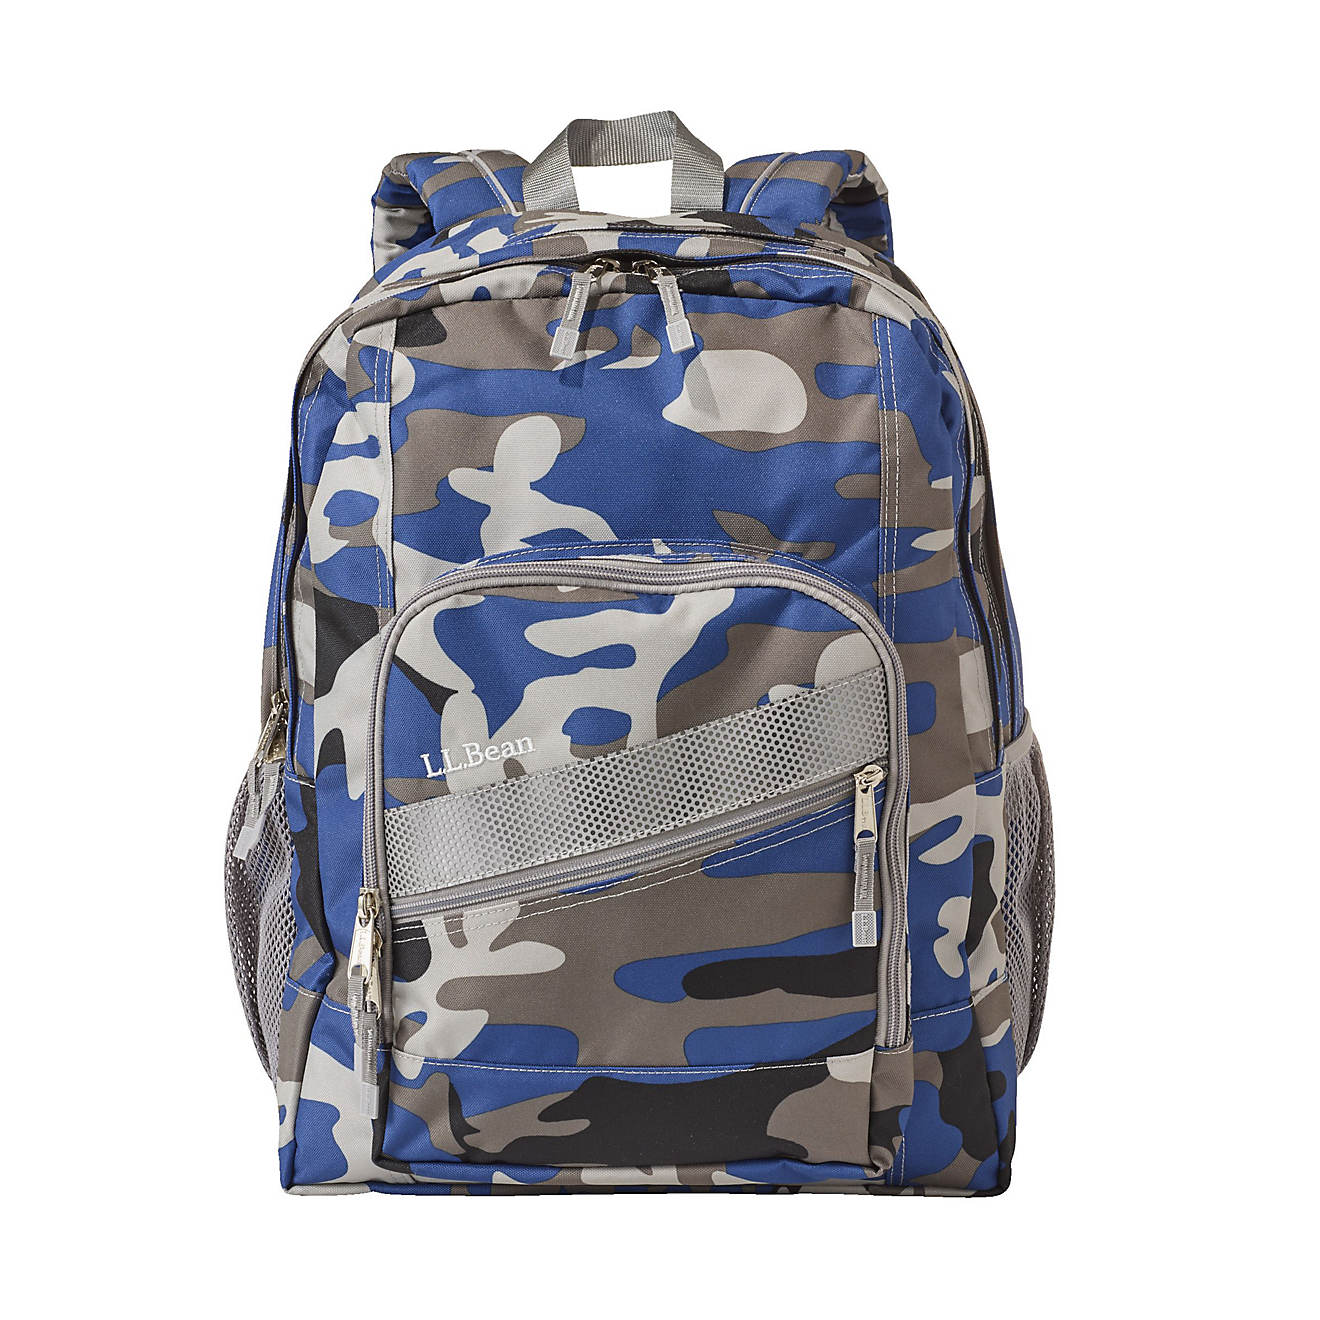 https://academy.scene7.com/is/image/academy//bags---backpacks/llbean-deluxe-camo-backpack-137988-blue/7e81224ee7cc437a9804c6604be20ca8?$pdp-gallery-ng$